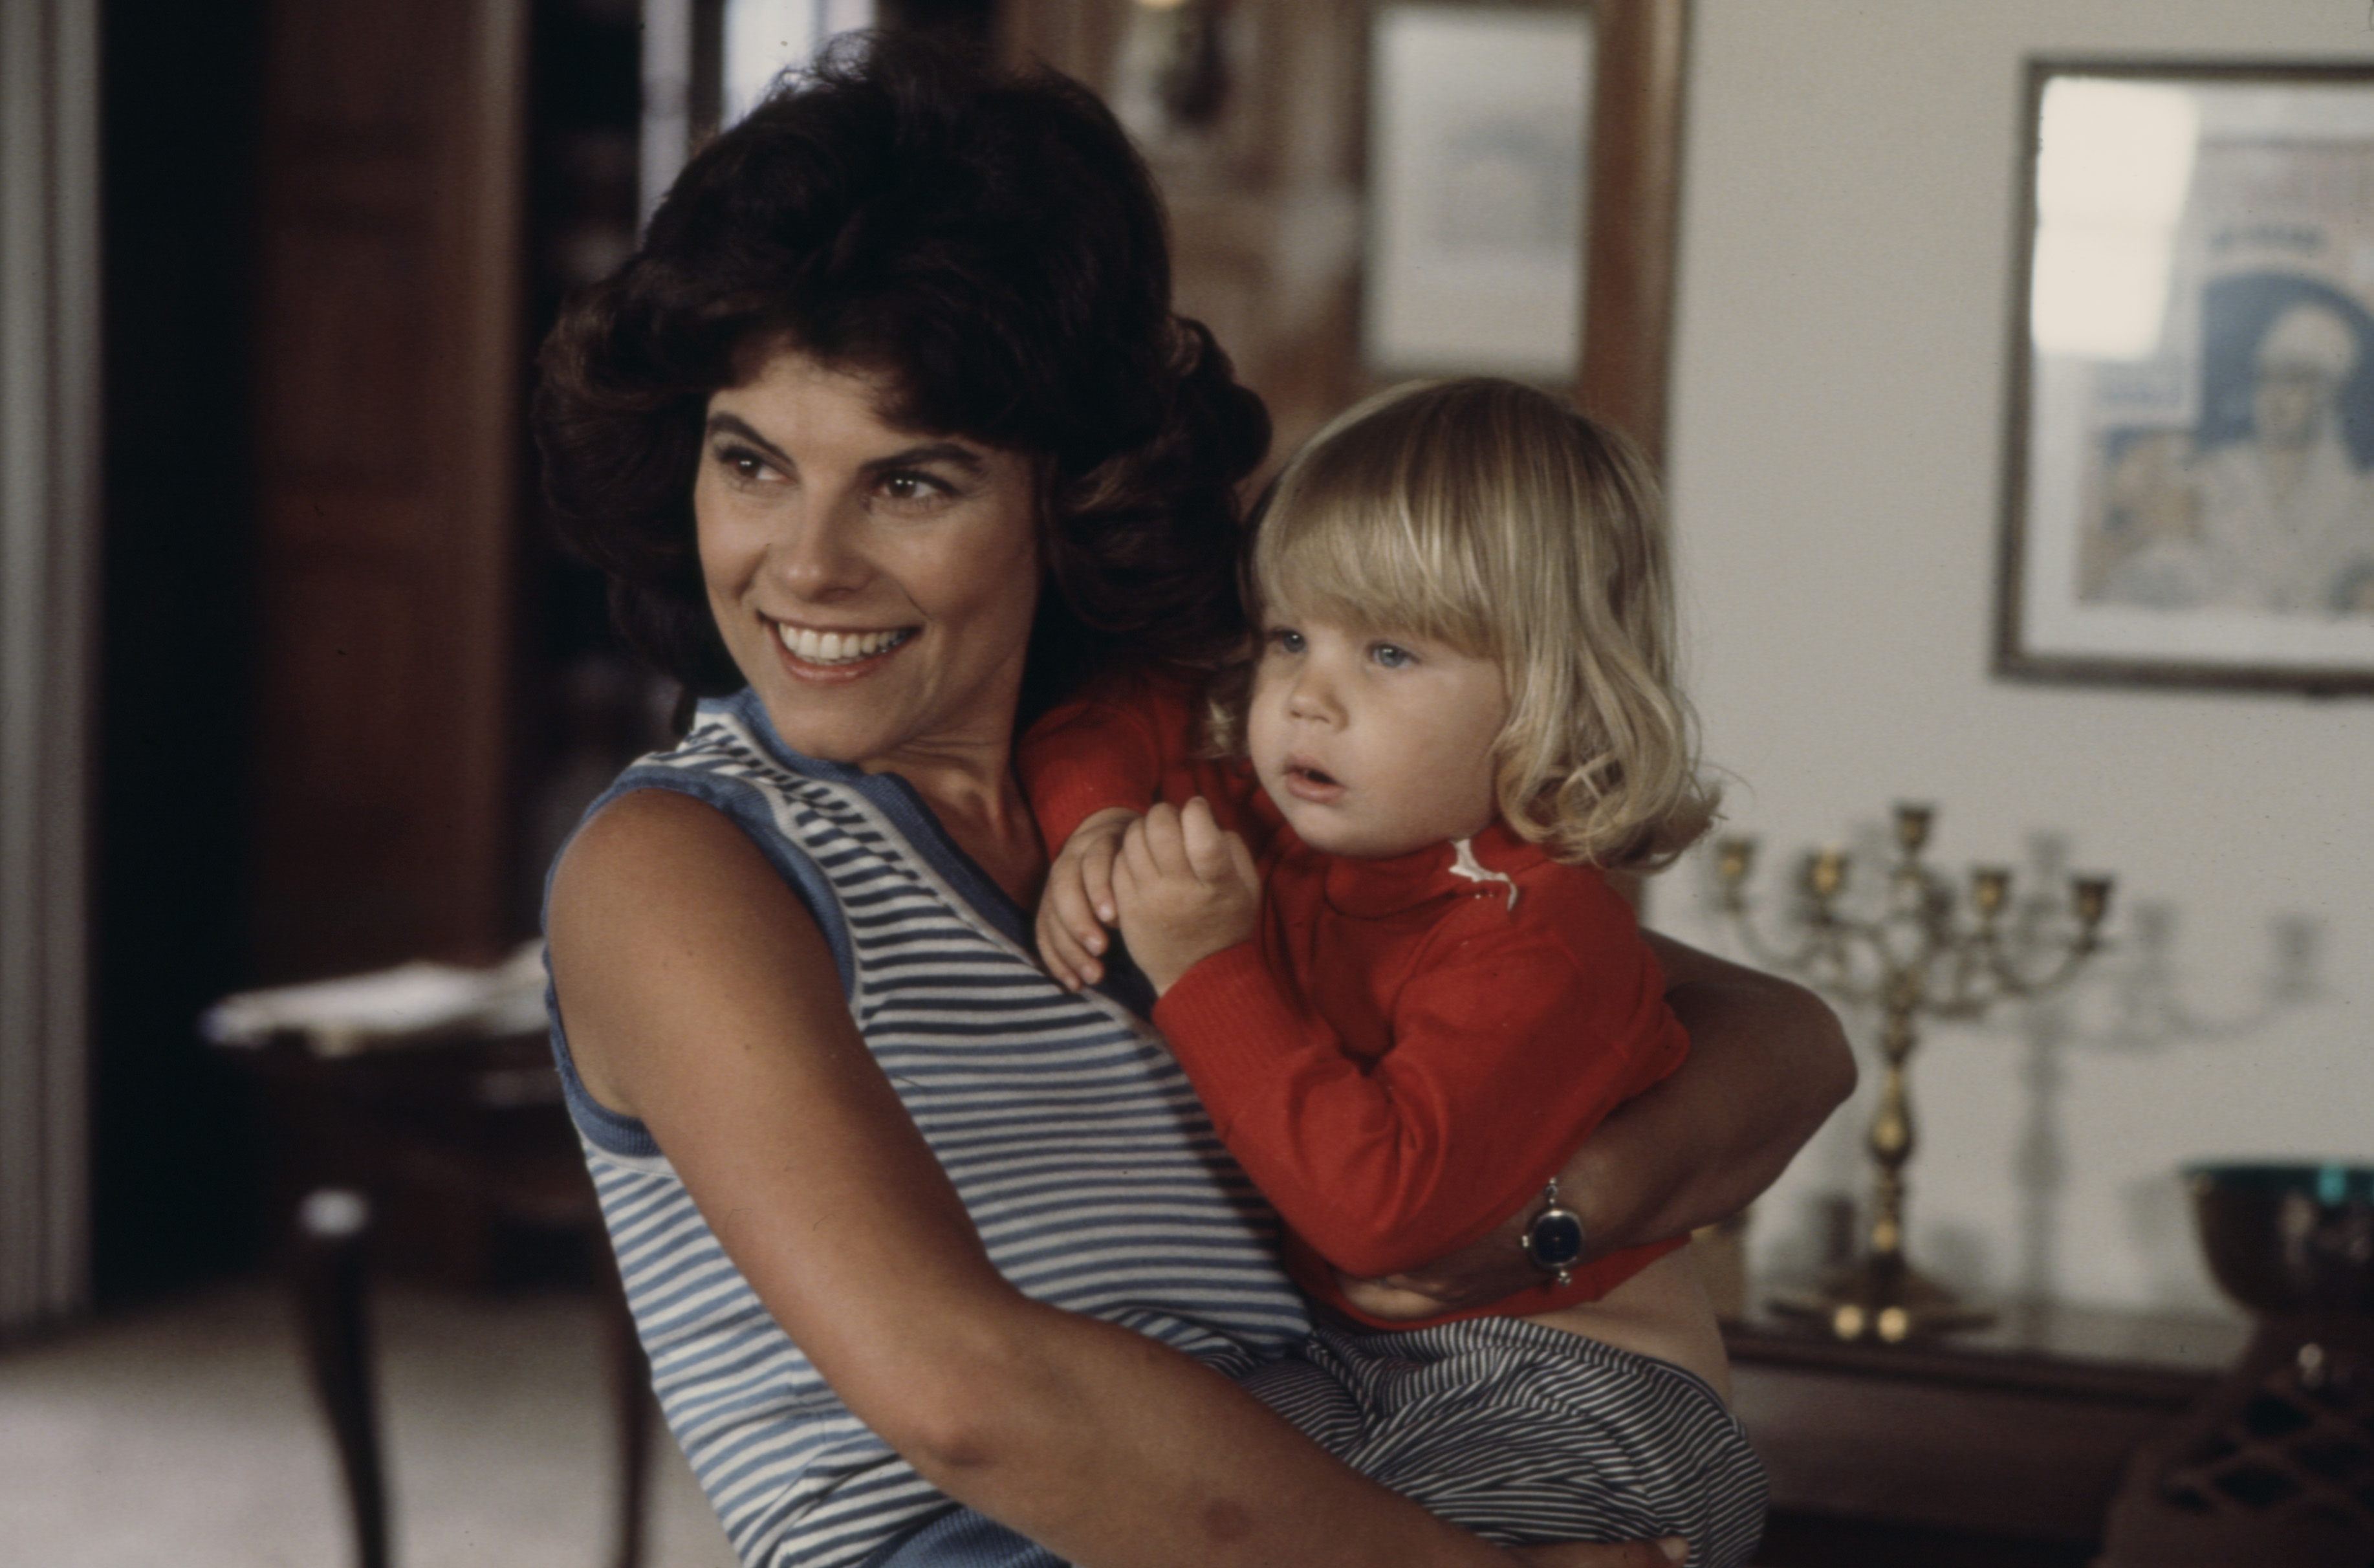 Adrienne Barbeau in "Having Babies" in 1976 | Source: Getty Images